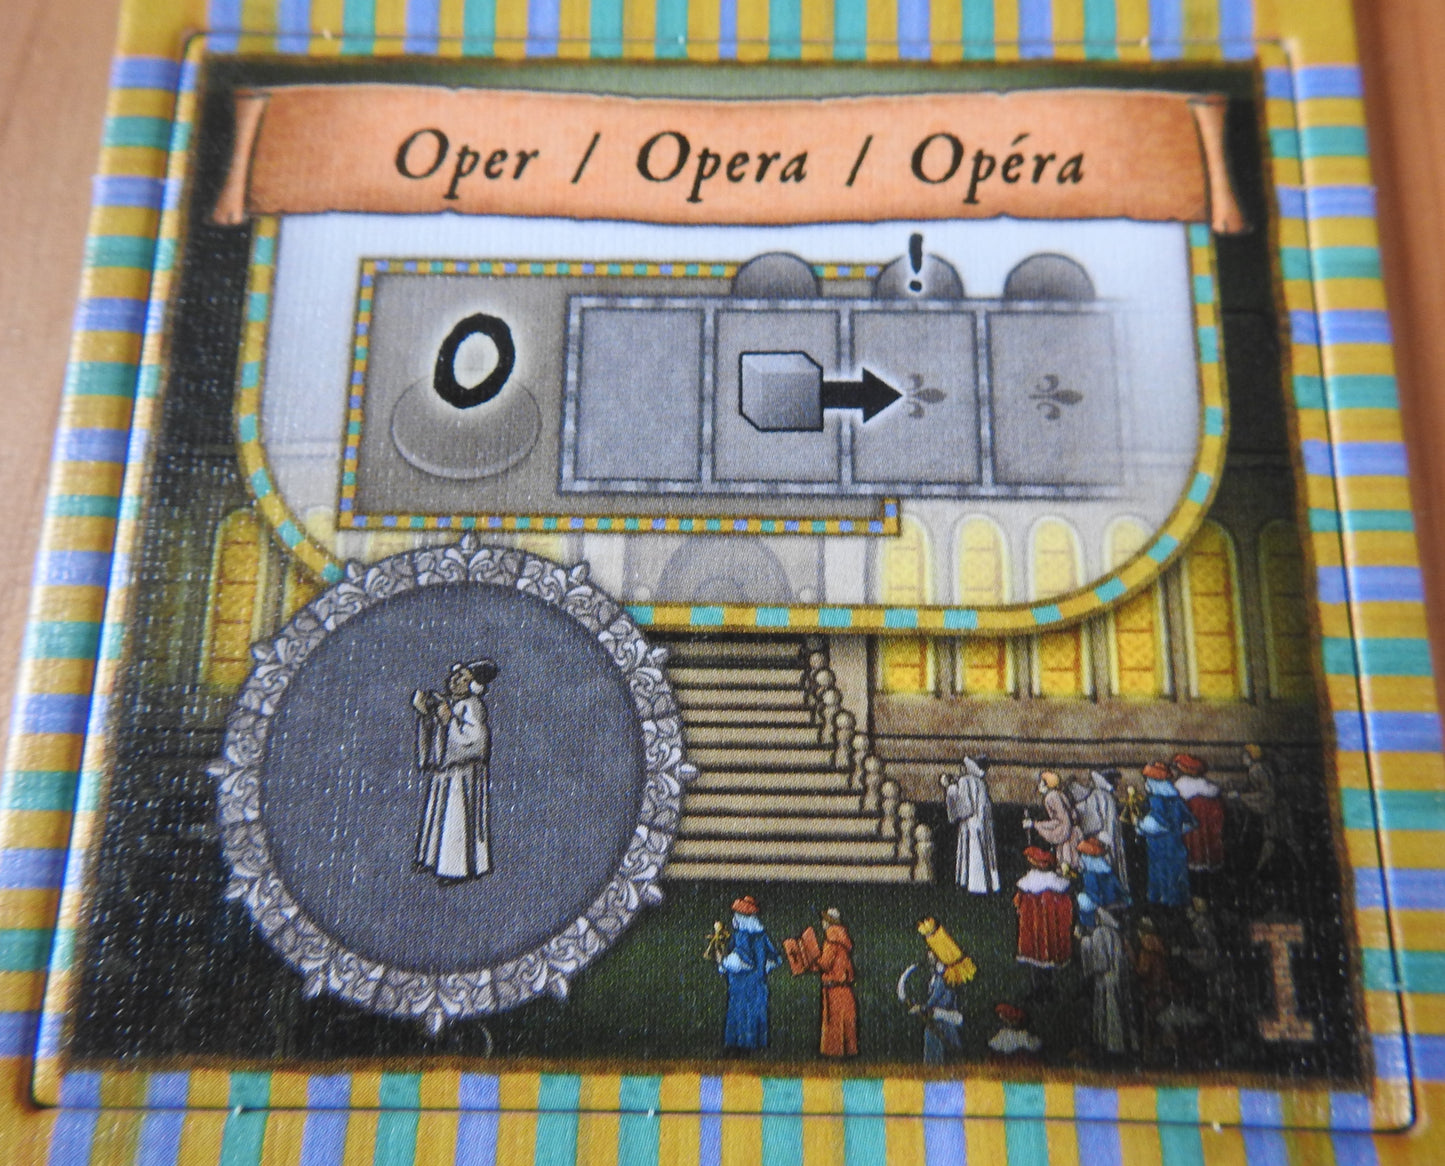 Close-up view of the Opera promo place tile.